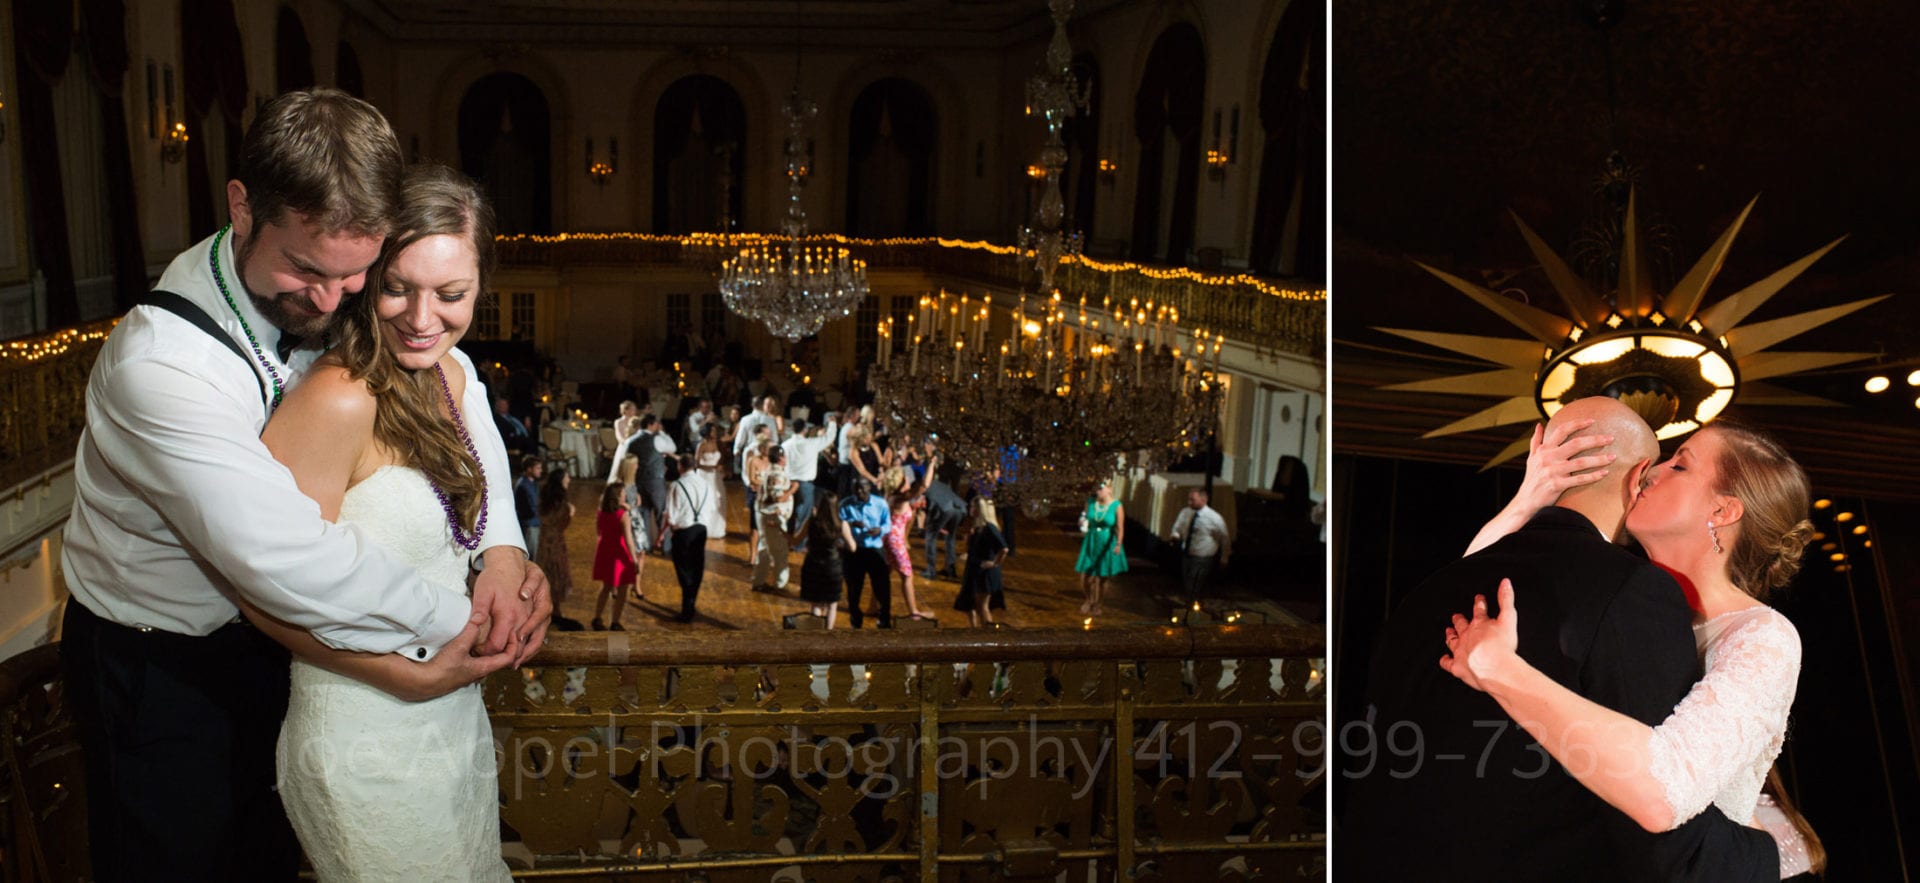 couples embrace under chandeliers